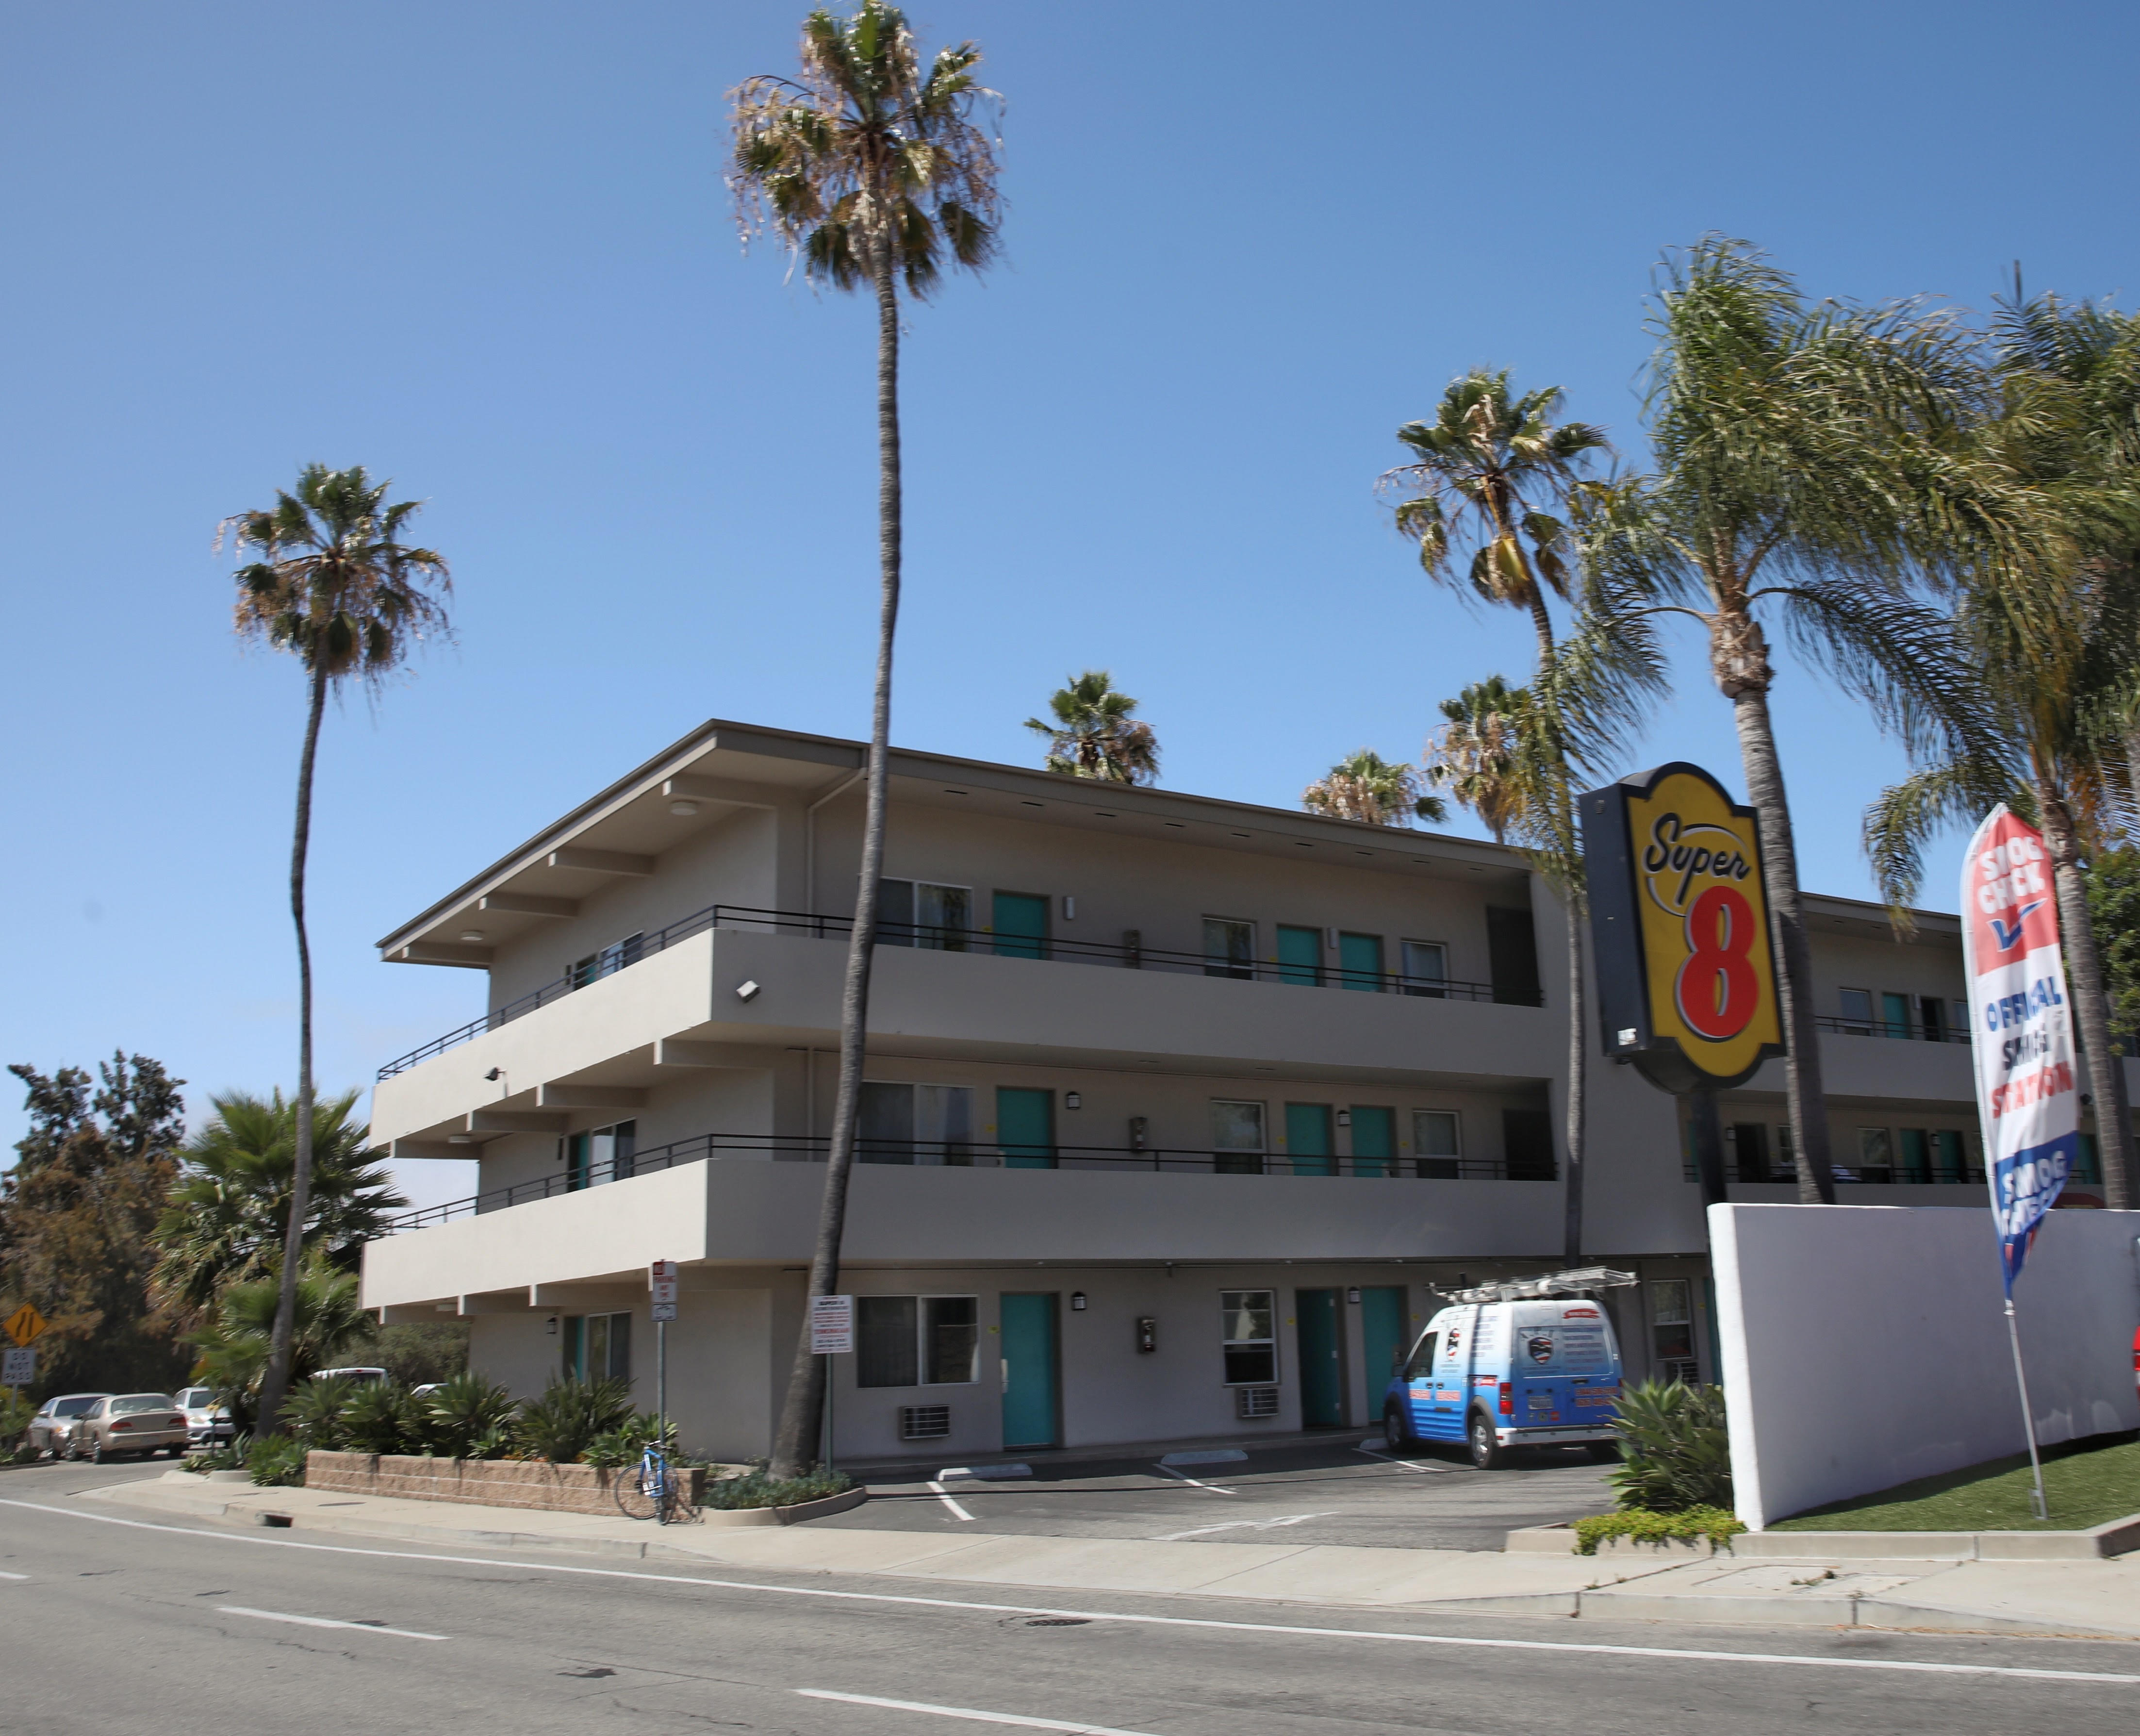 Converting a motel to homeless housing, step by step - CalMatters